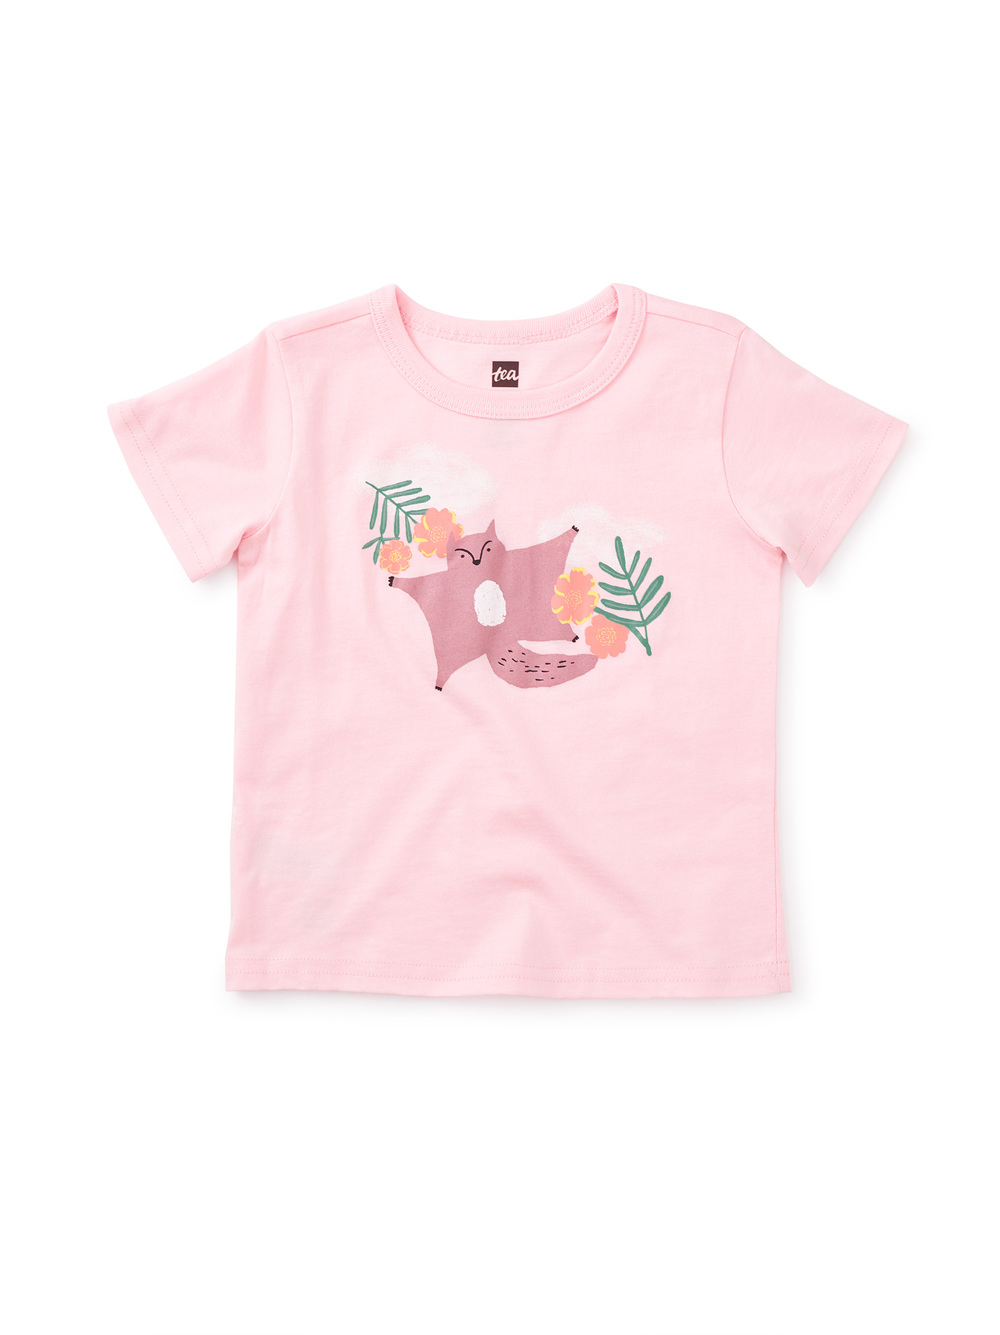 Flying Squirrel Graphic Tee